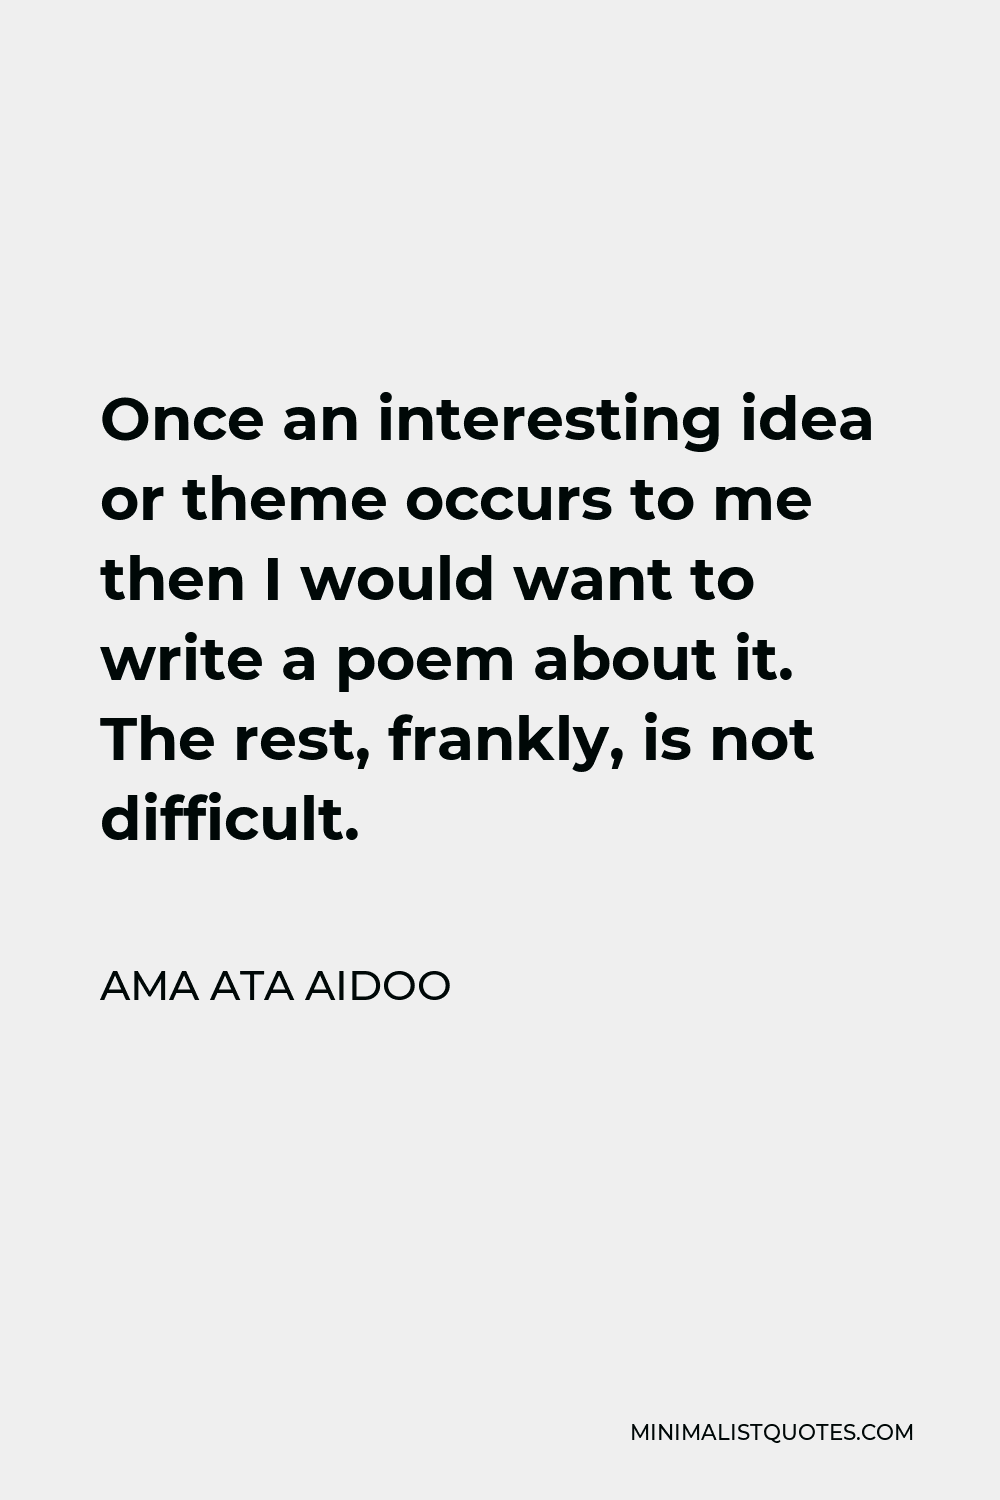 Ama Ata Aidoo Quote - Once an interesting idea or theme occurs to me then I would want to write a poem about it. The rest, frankly, is not difficult.